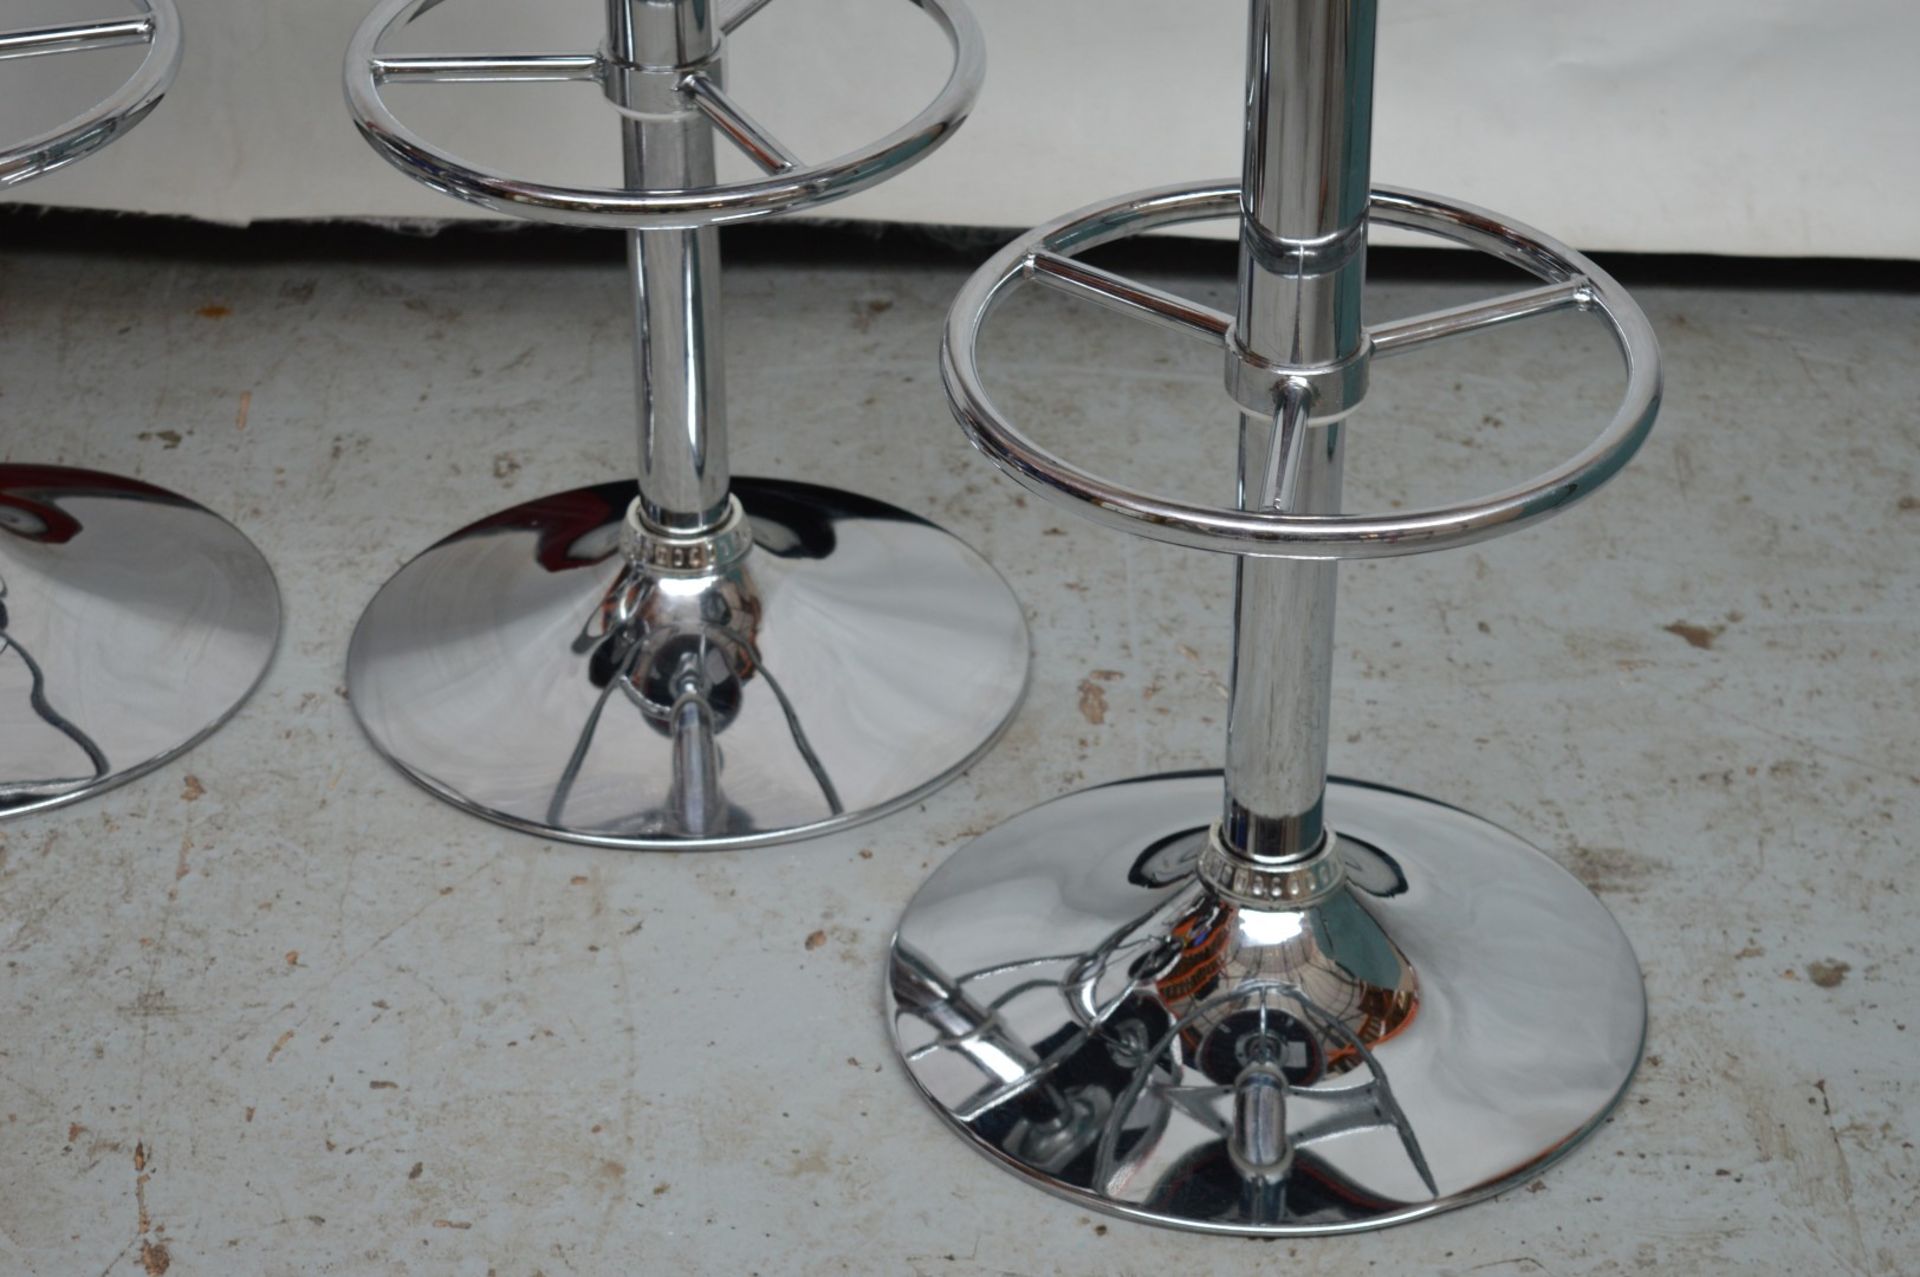 4 x Retro American Roadside Diner Themed Gas Lift Bar Stools - CL164 - Fantastic Stools With Full - Image 3 of 14